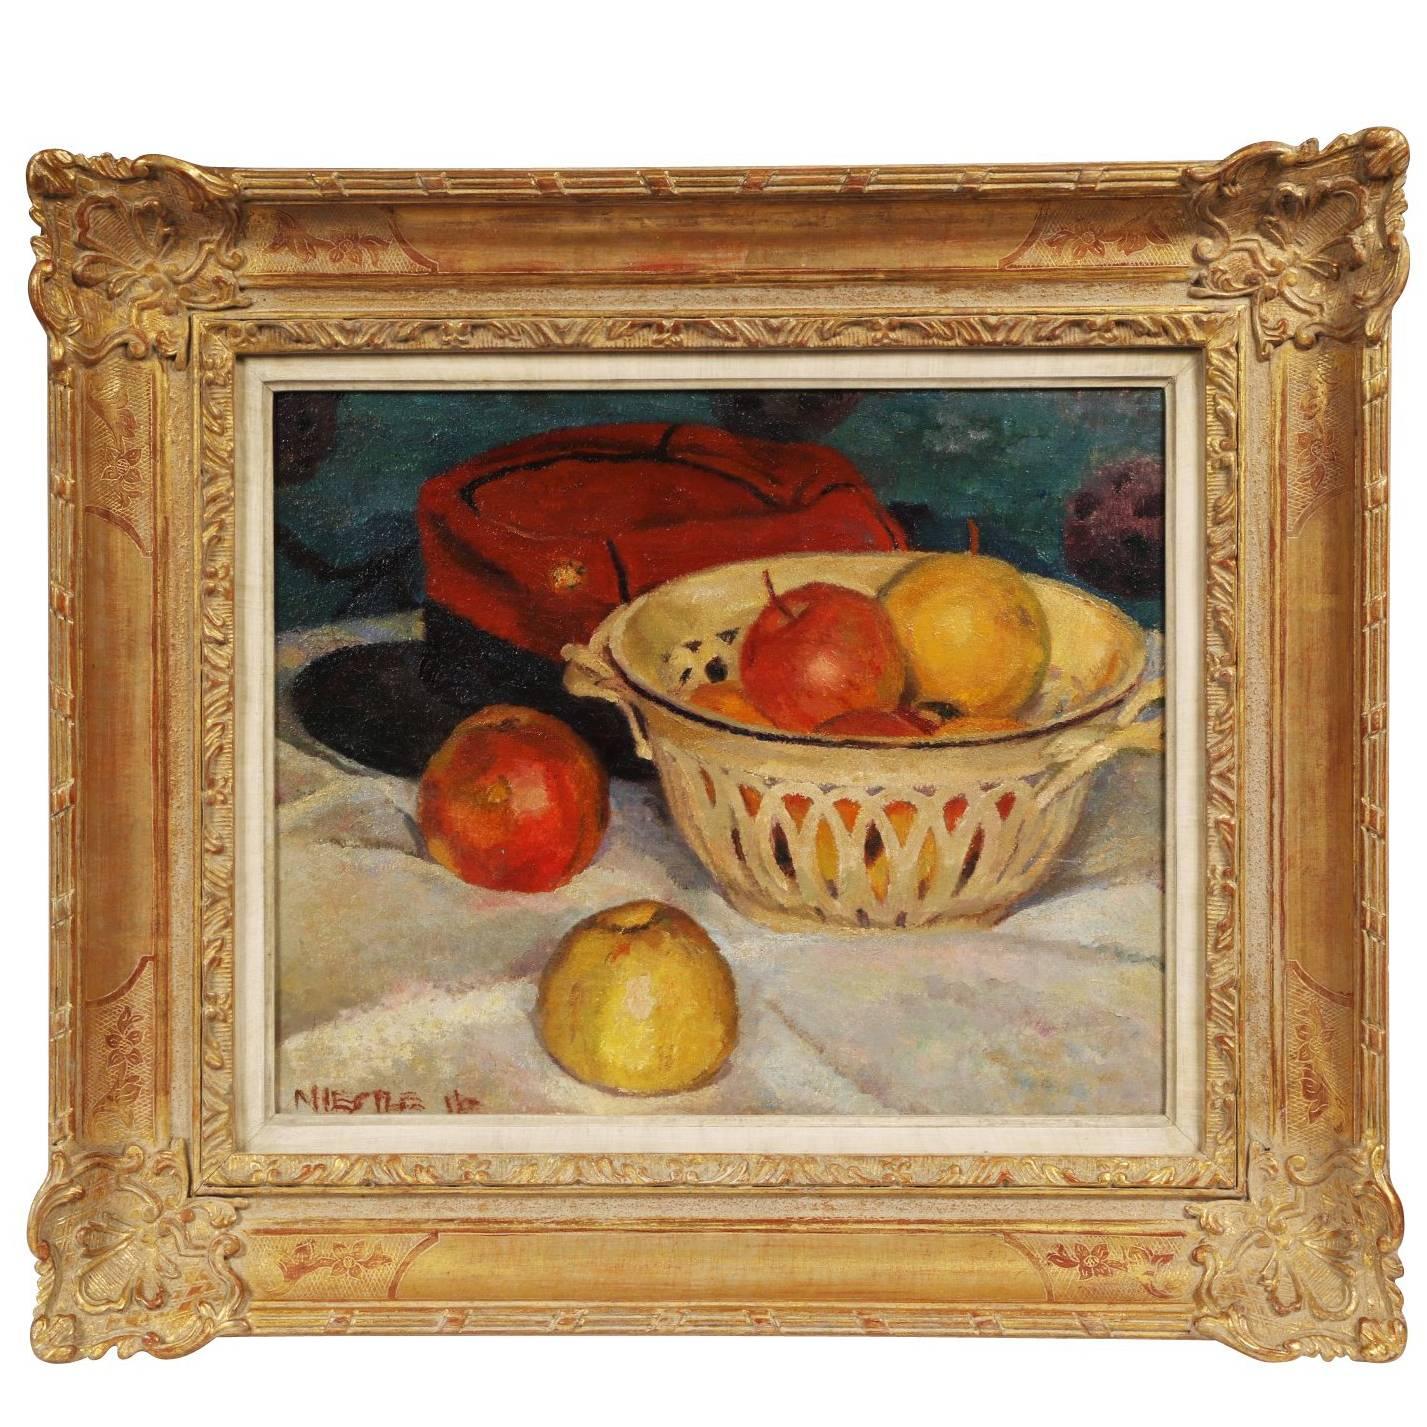 Henry Niestle Oil on Canvas Titled Still Life with Apple